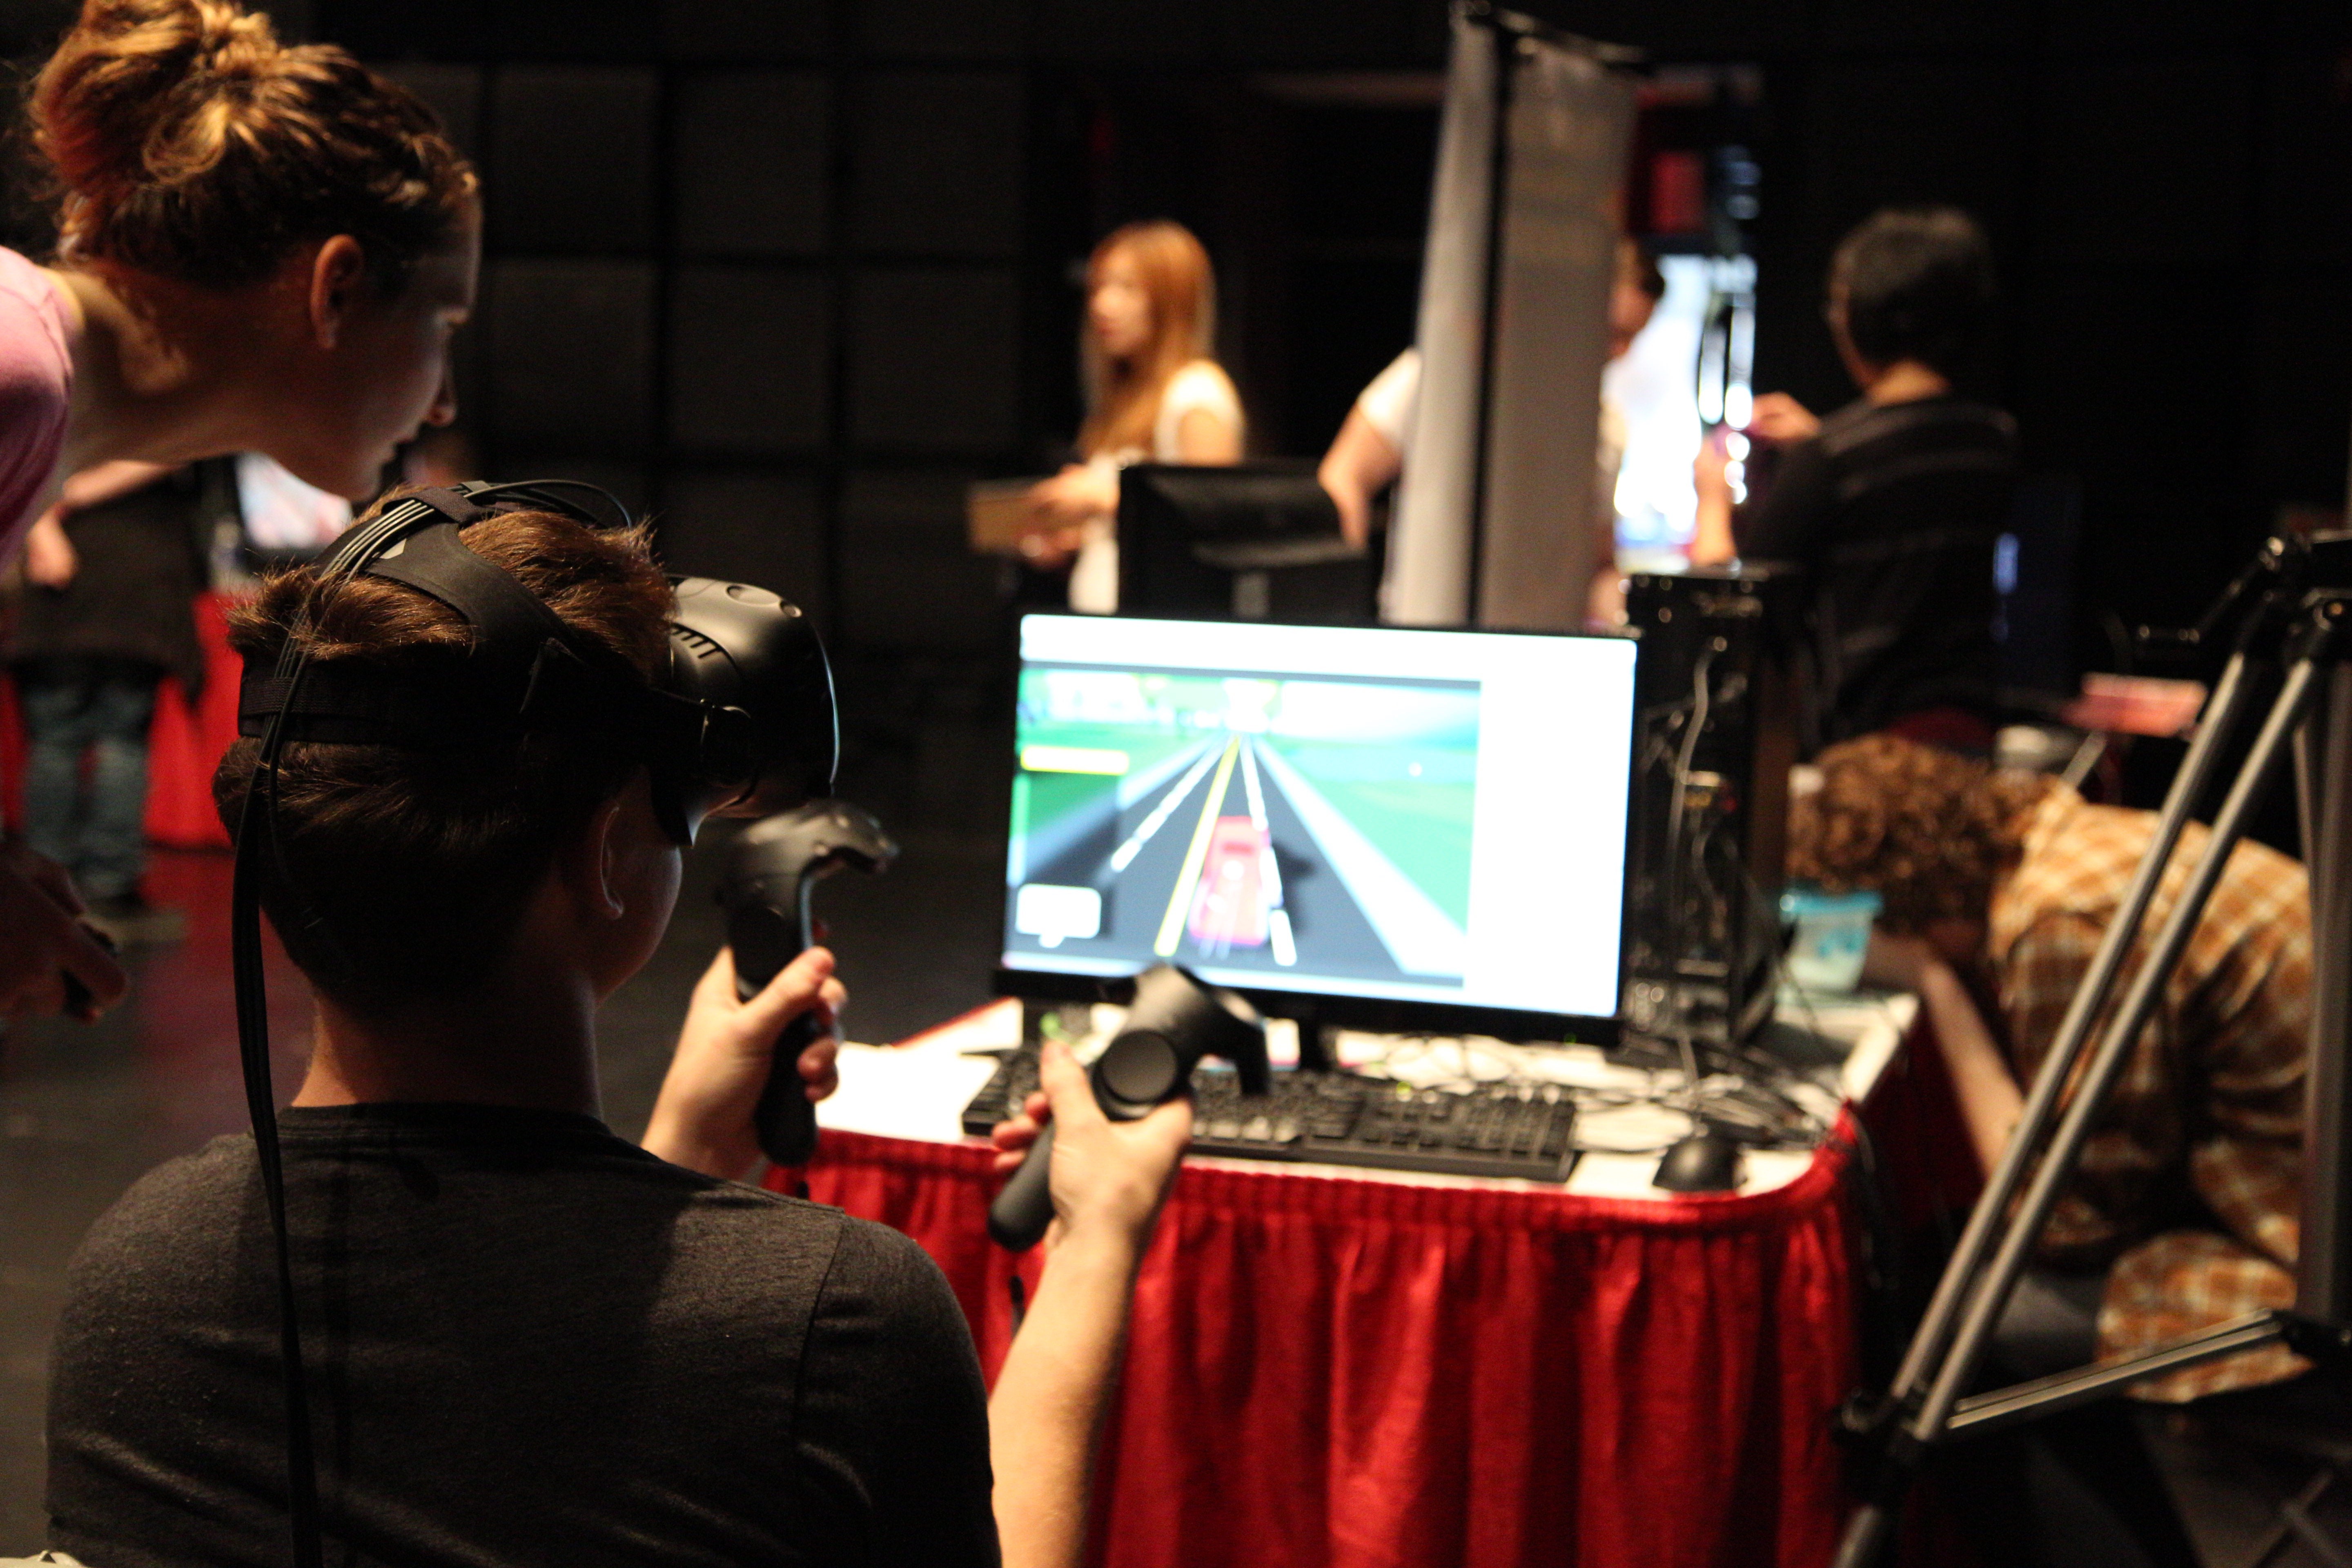 A student playing a VR-style game at GameFest 2016.